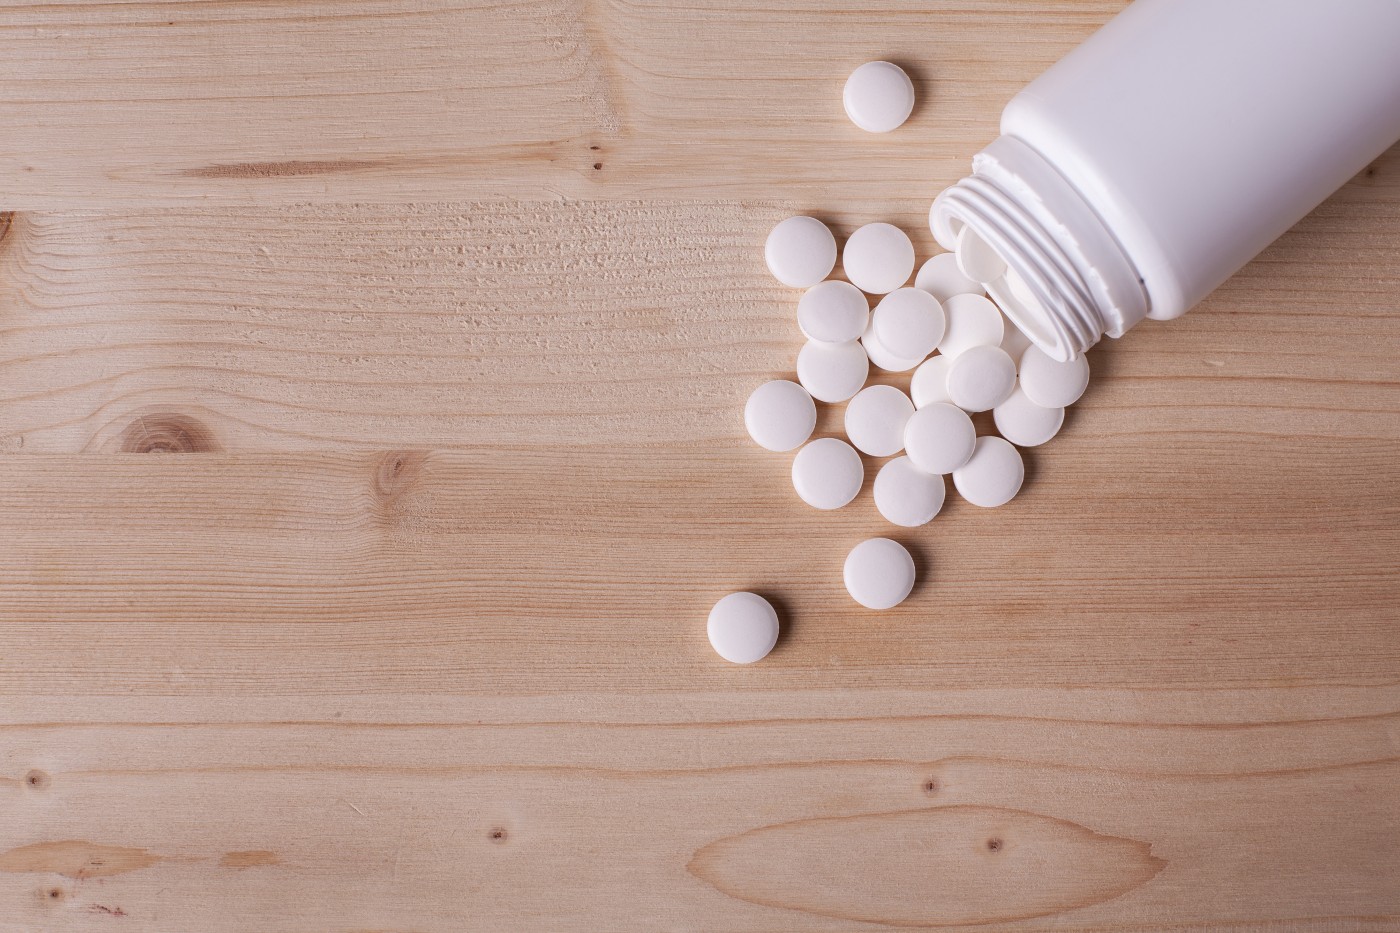 Aspirin Found to Reverse Cancer Risk Associated with Obesity